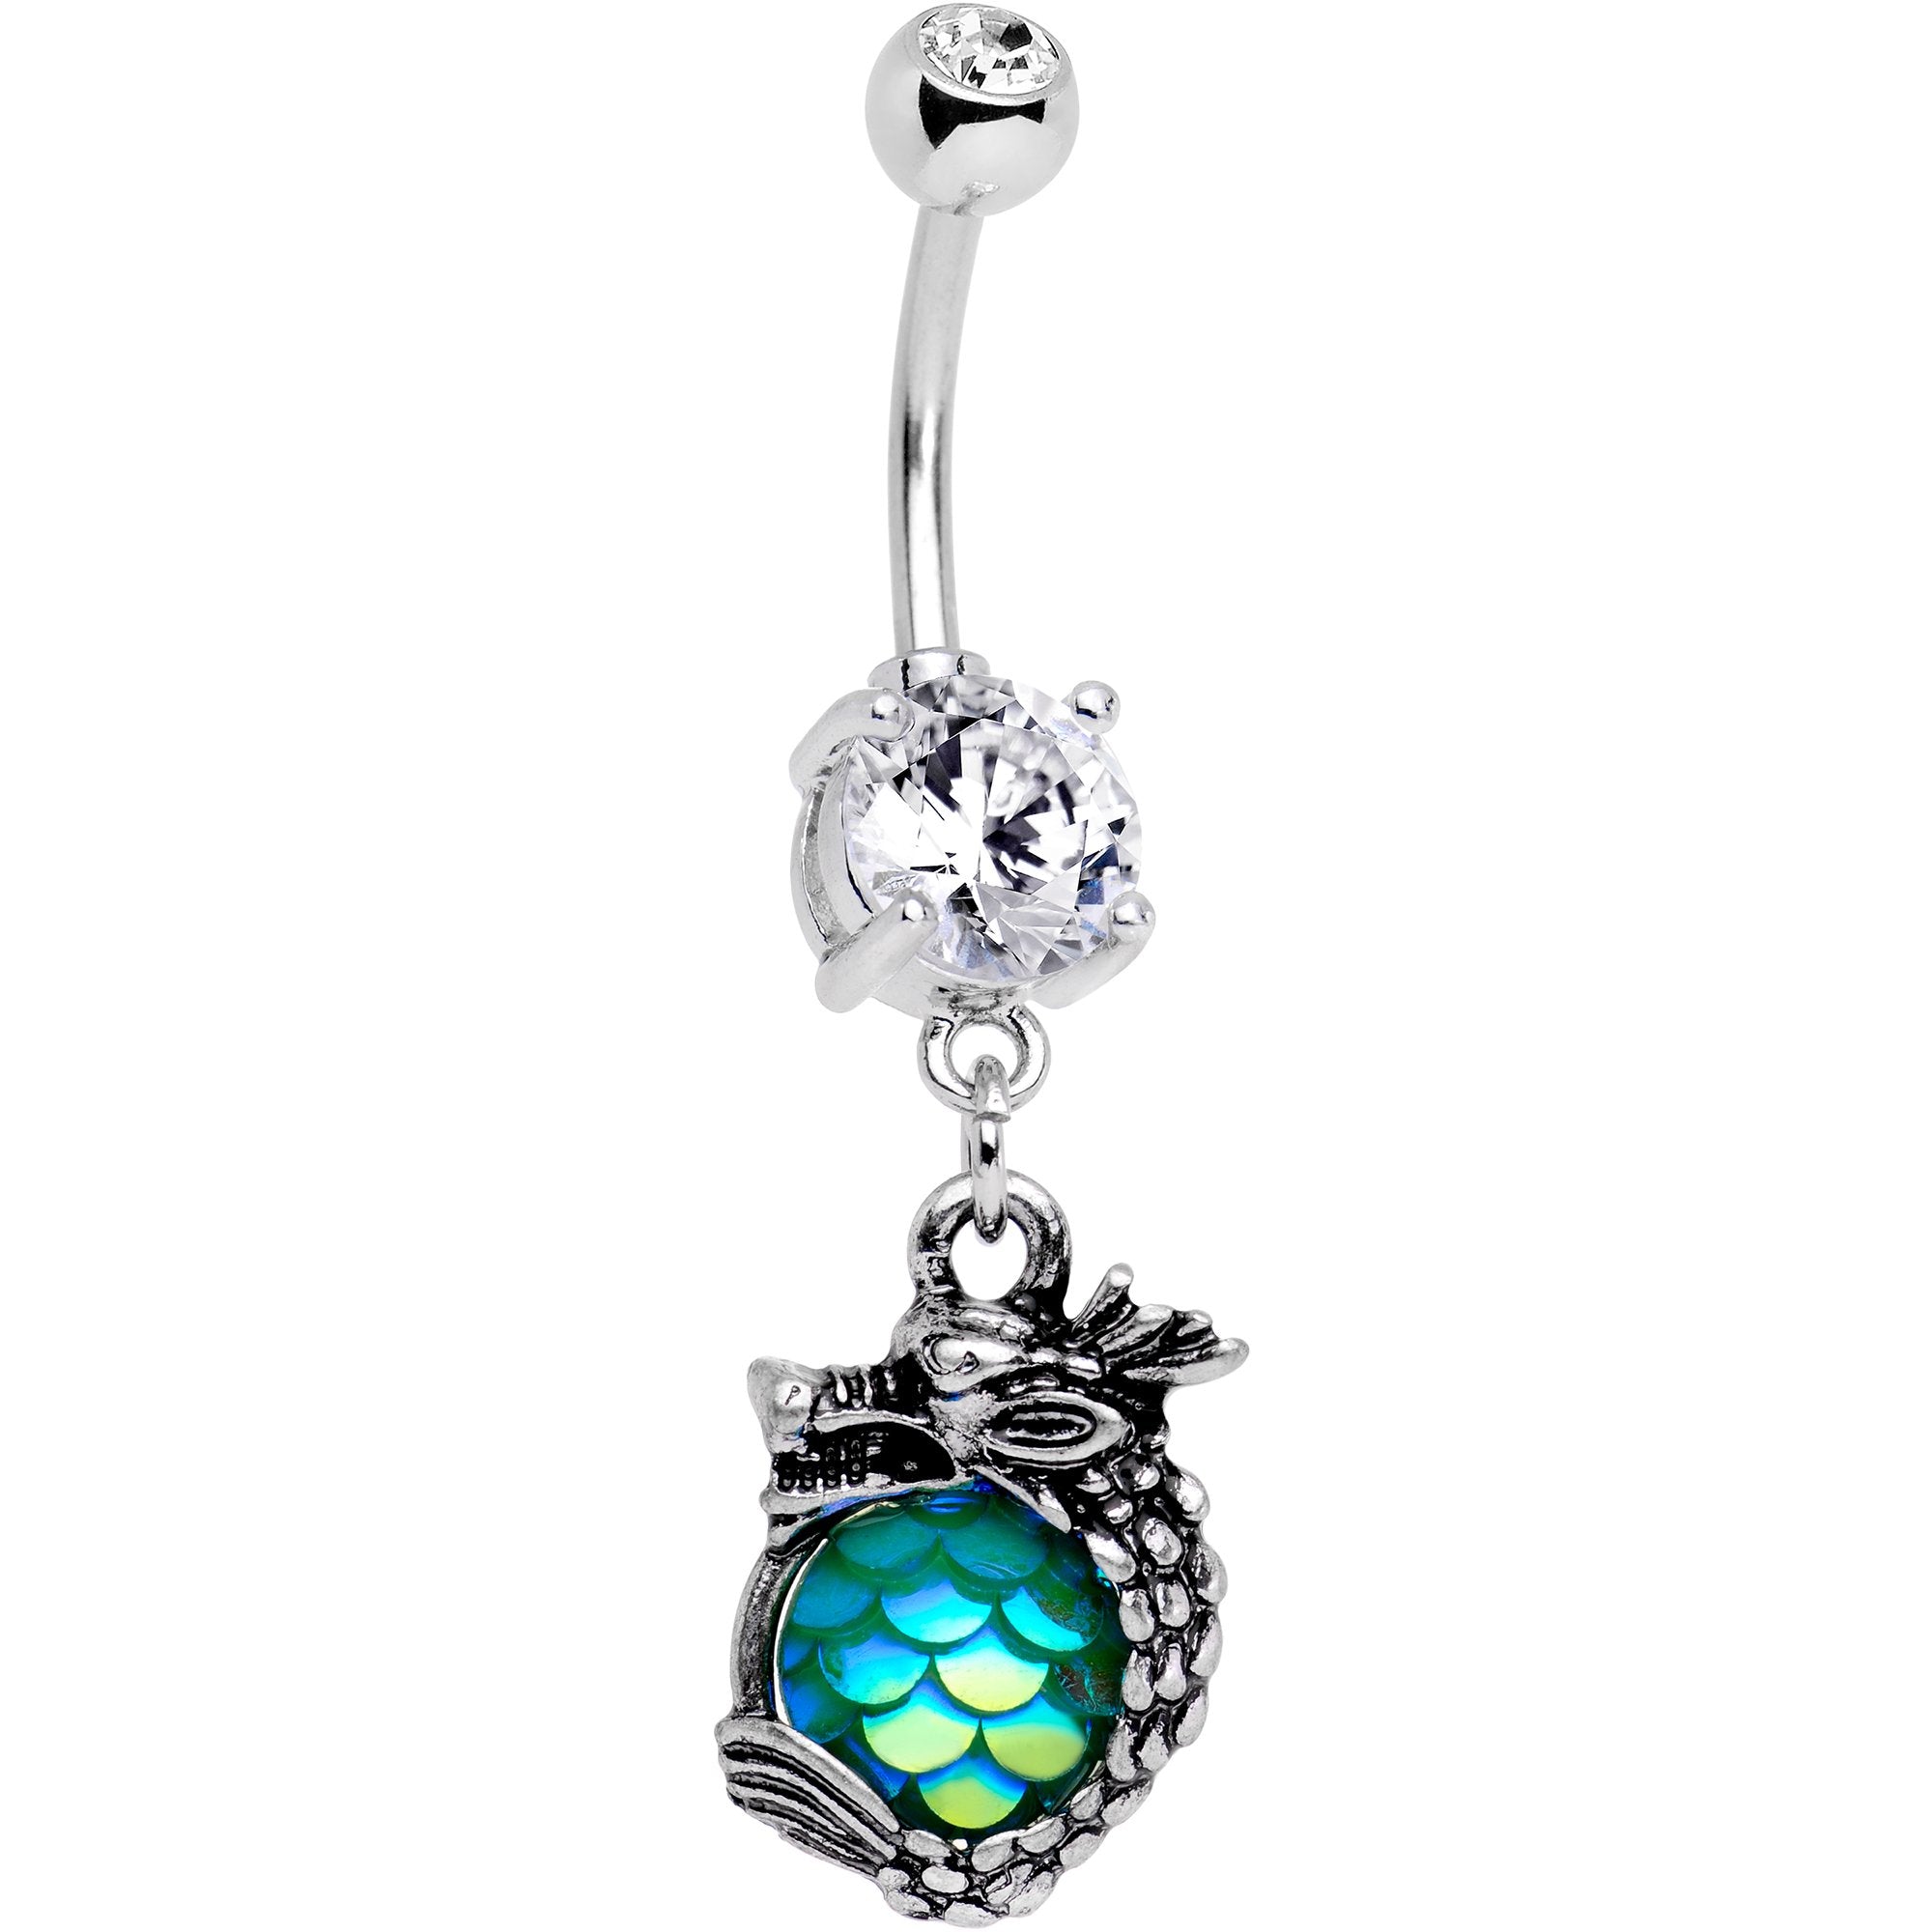 Clear Gem Iridescent Green Scale Dragon Egg Dangle Belly Ring